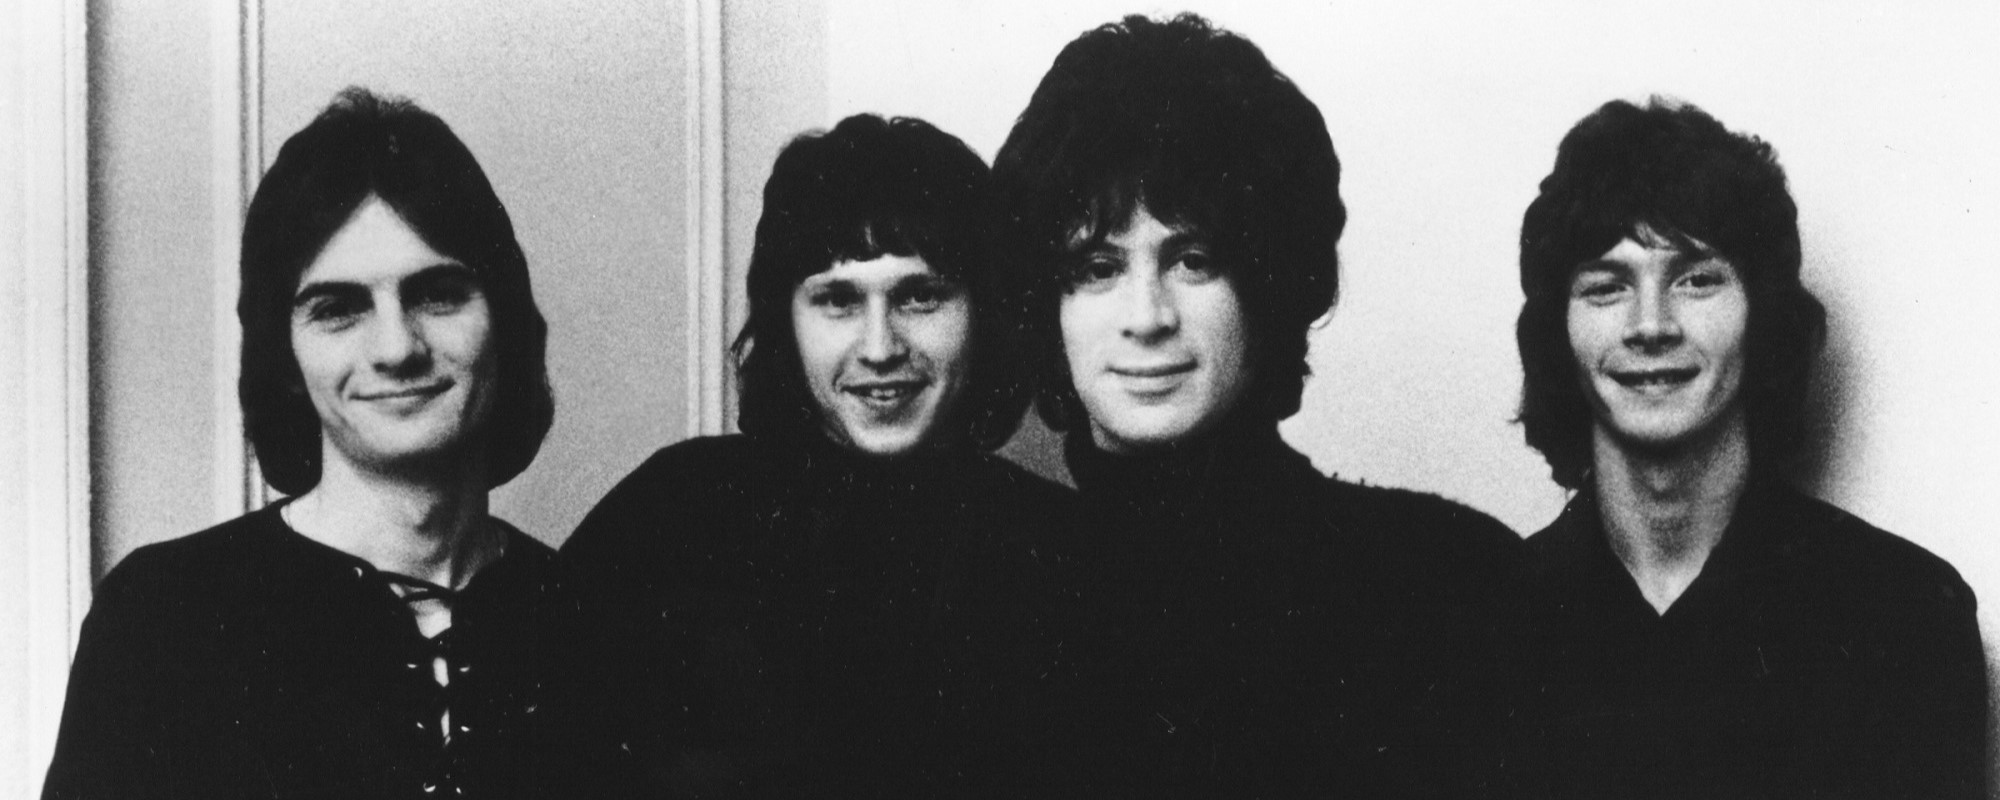 The Story Behind the Late Eric Carmen’s Risqué Hit with The Raspberries, “Go All the Way”